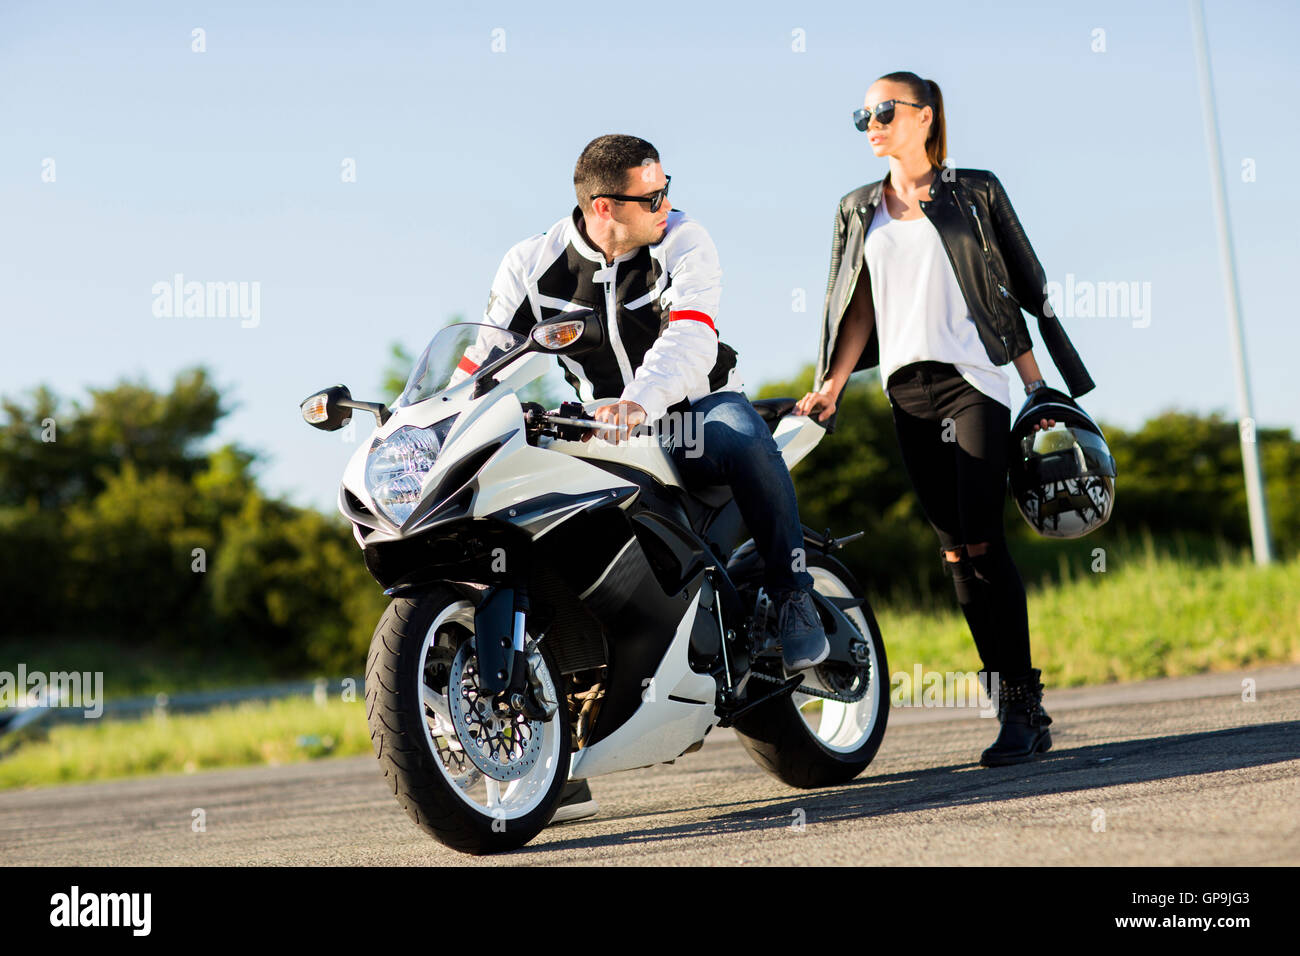 Man and woman wearing leather jackets and stylish sunglasses riding on motorcycle Stock Photo